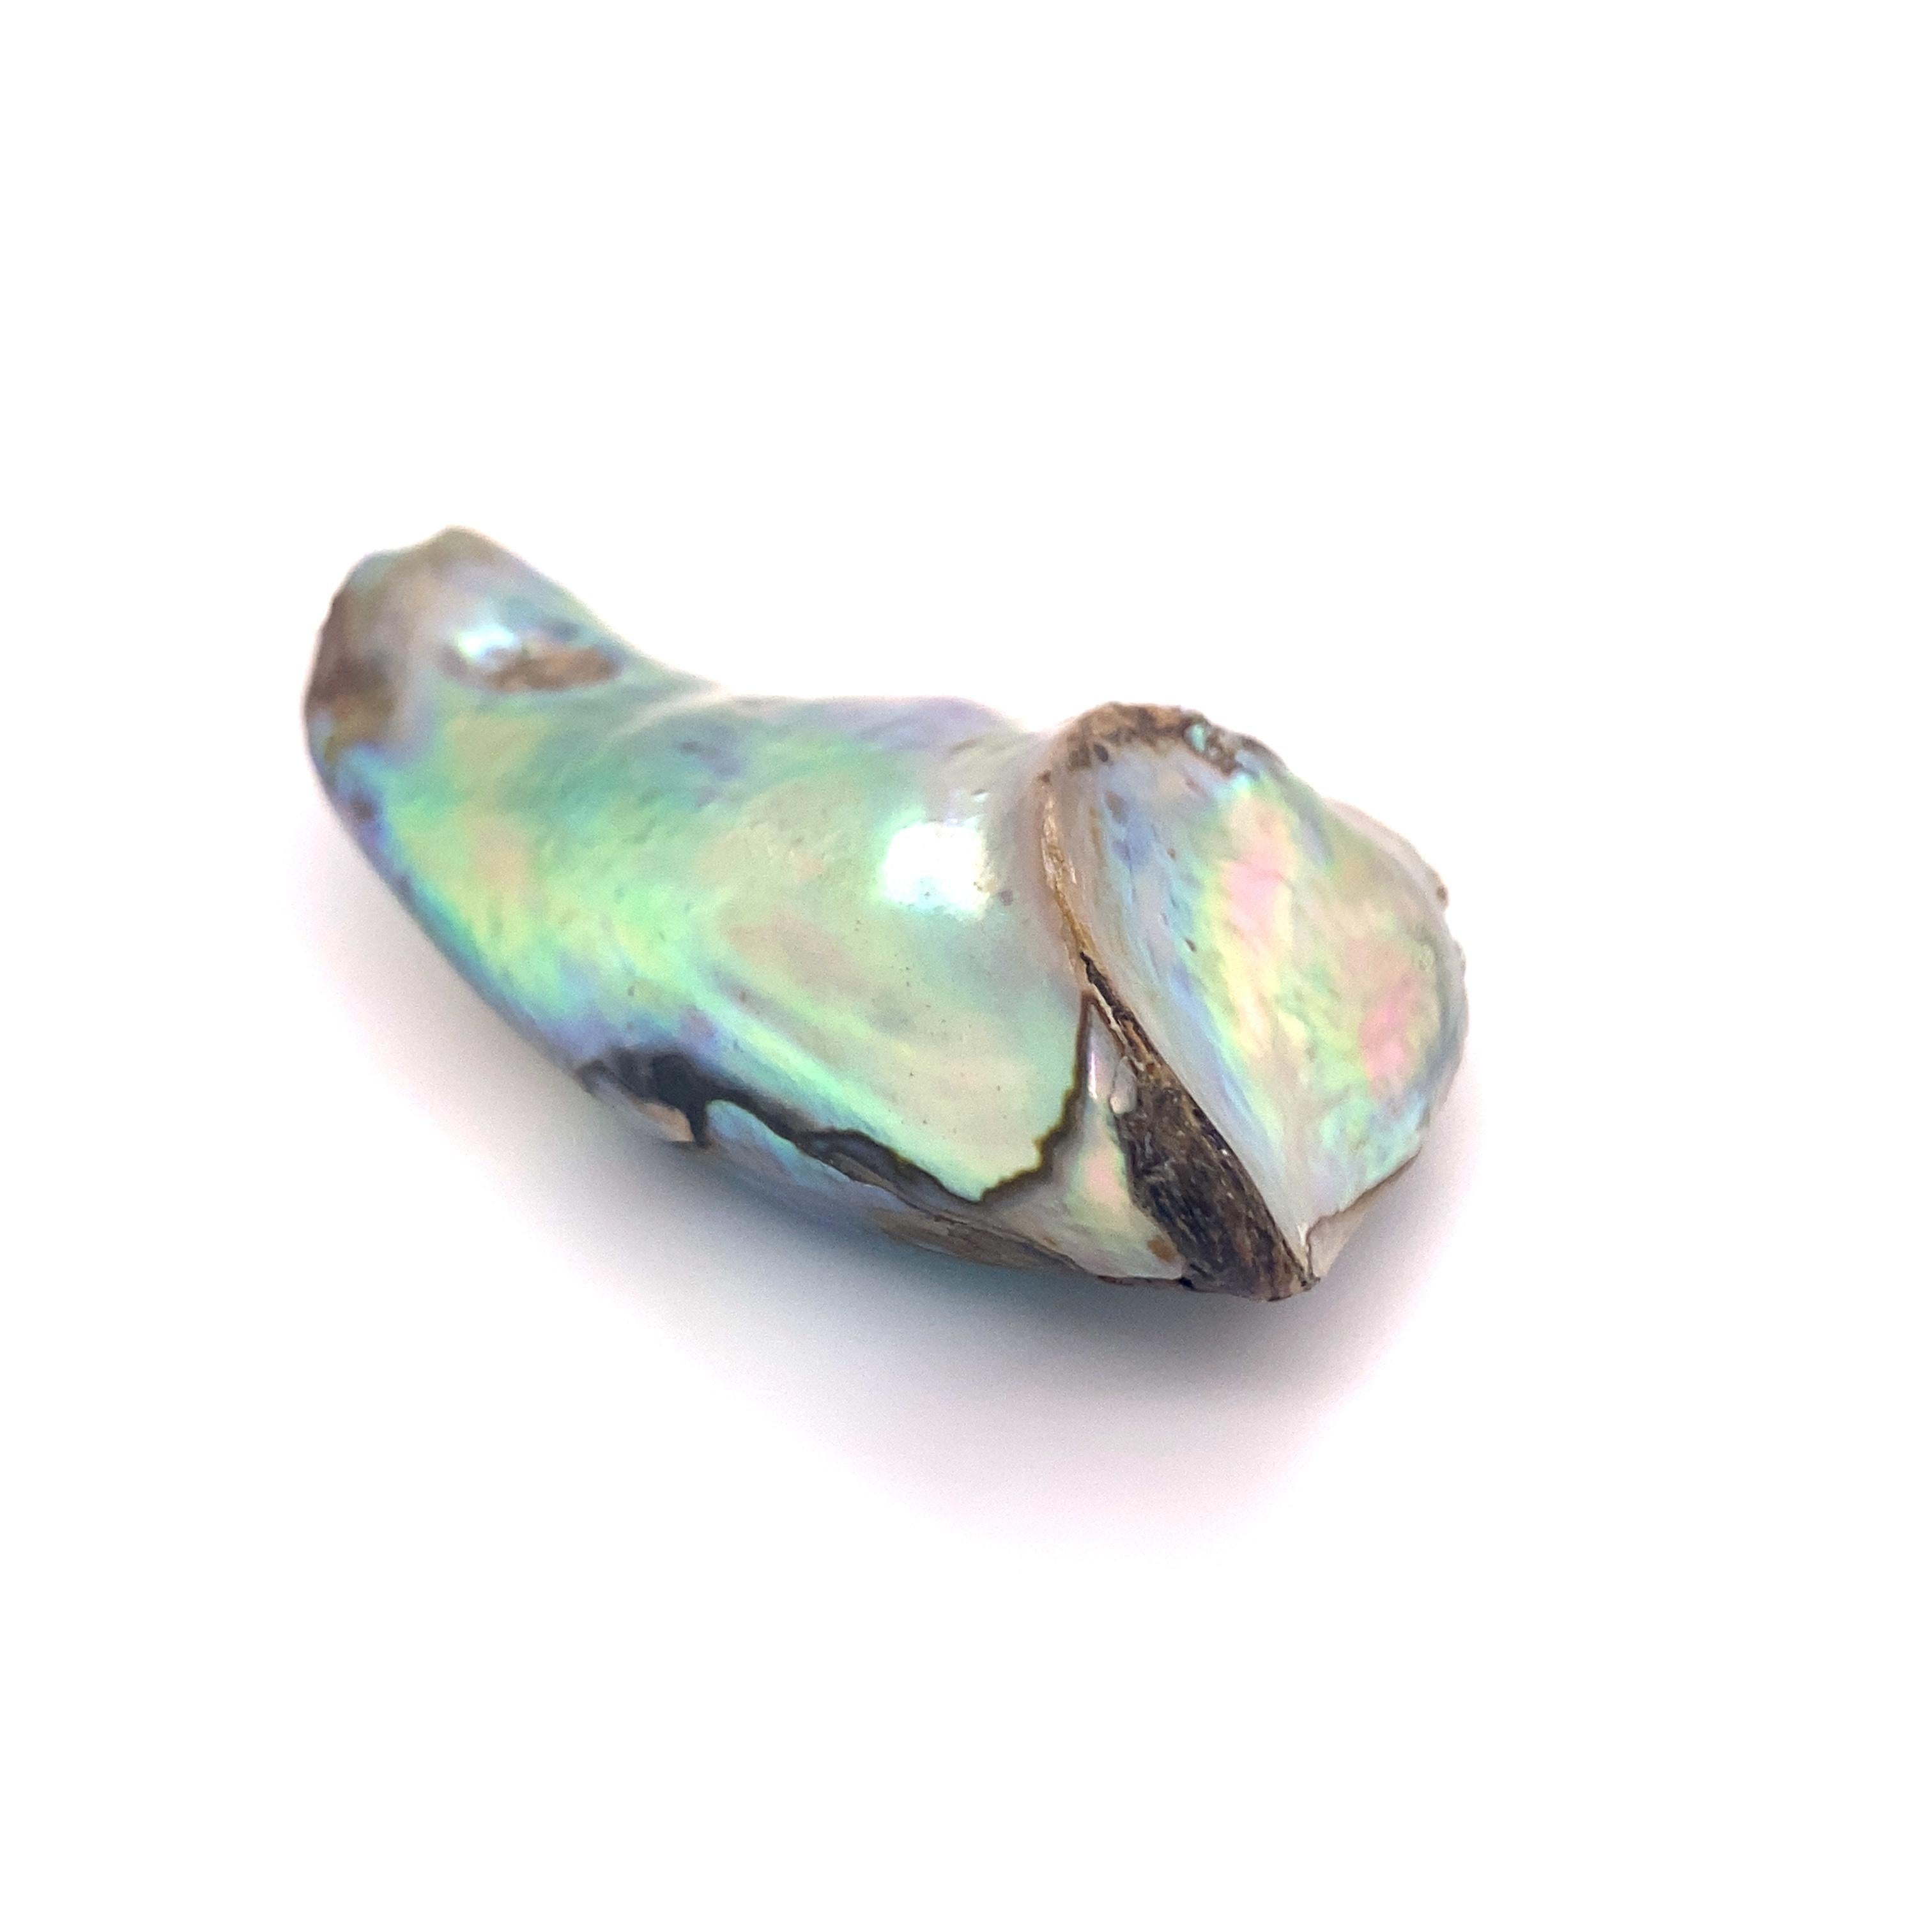 abalone pearls for sale